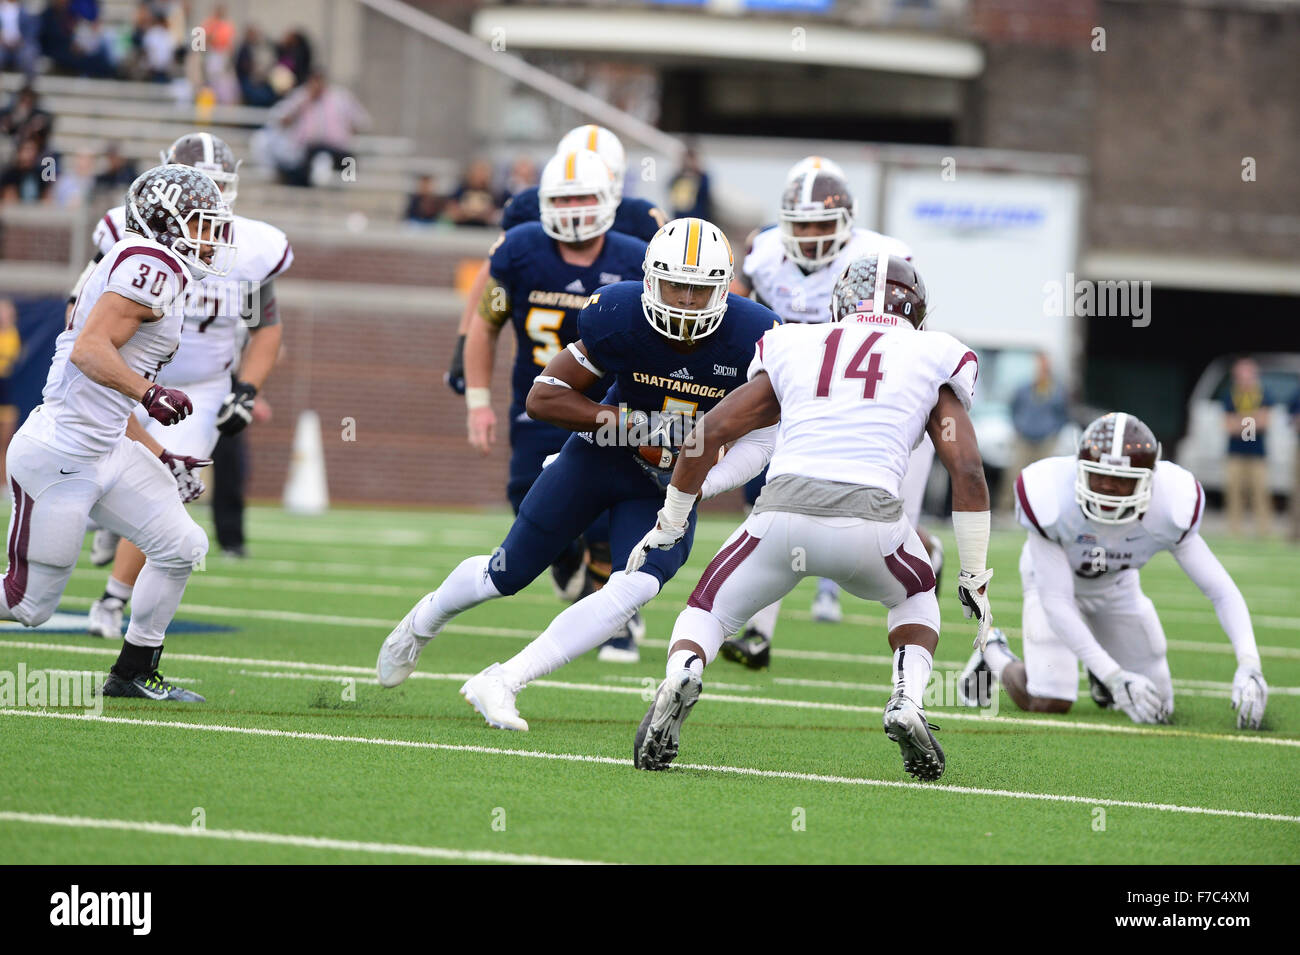 Chattanooga, Tennessee, USA. 28th Nov, 2015. Chattanooga Mocs wide receiver Bingo Morton (5) during the NCAA football game between the University of Chattanooga and Fordham at Finley Stadium in Chattanooga, Tennessee. Gary Fain/CSM/Alamy Live News Stock Photo